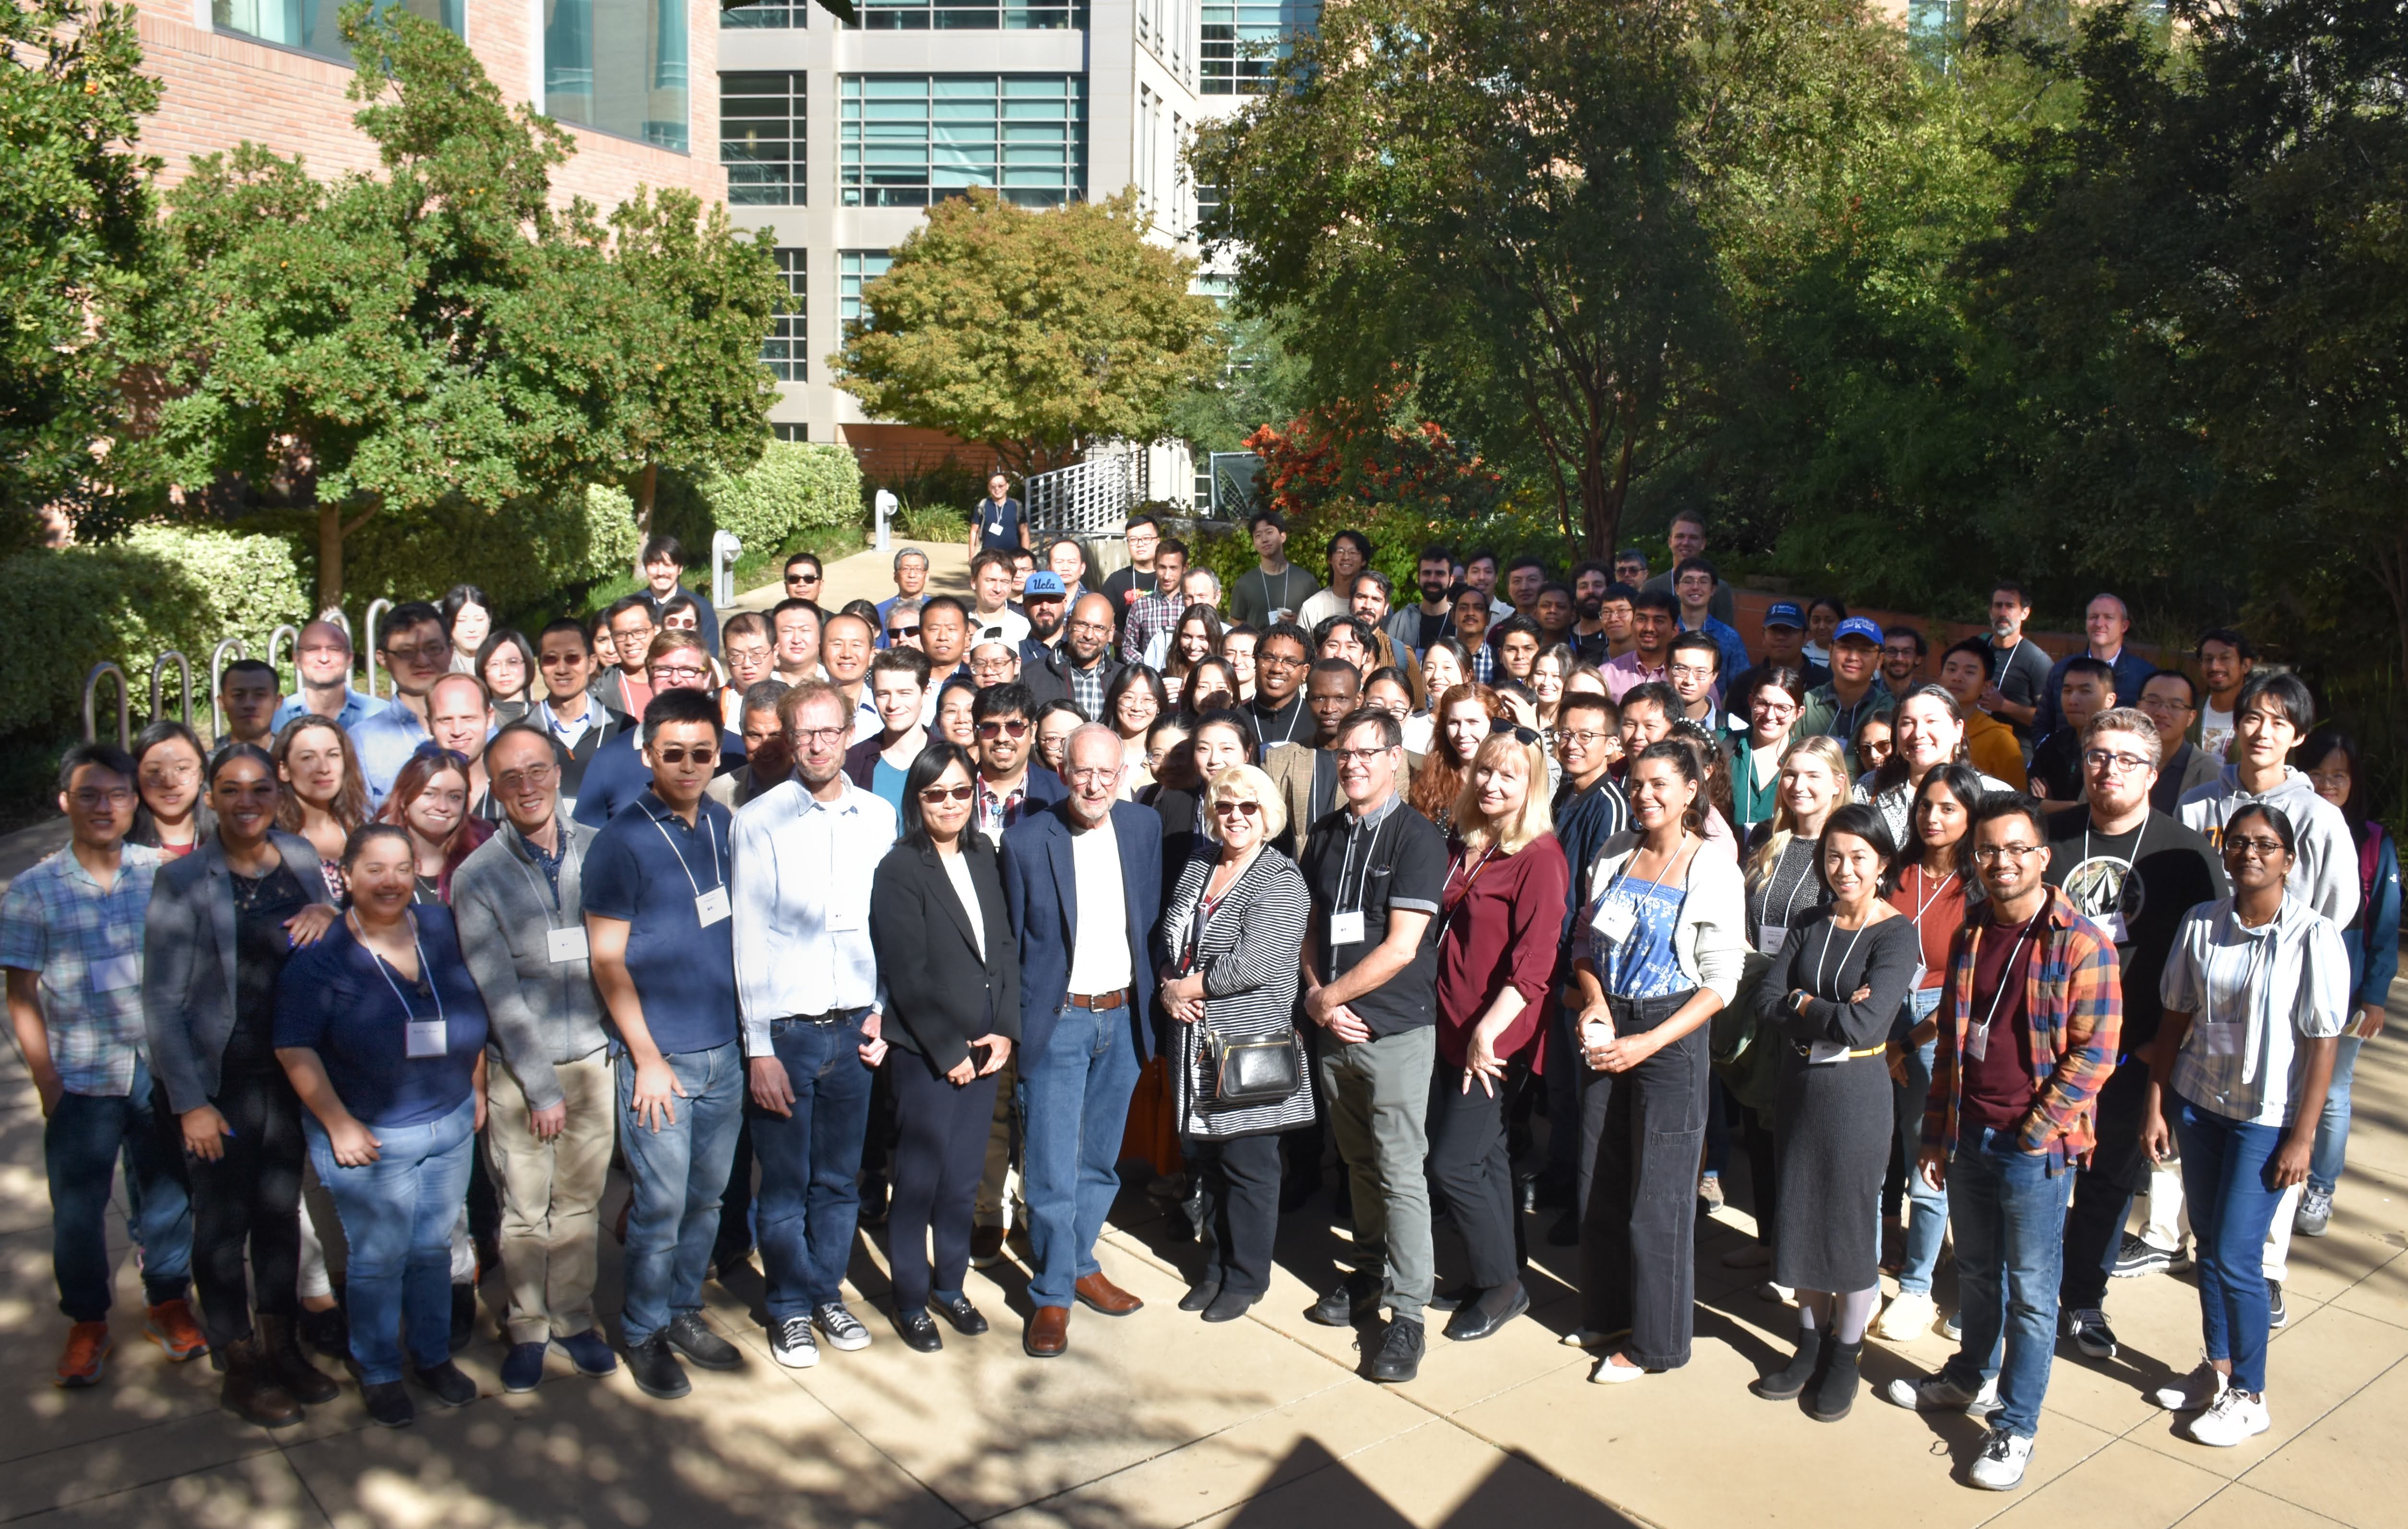 Attendees at 2nd annual RNA symposium